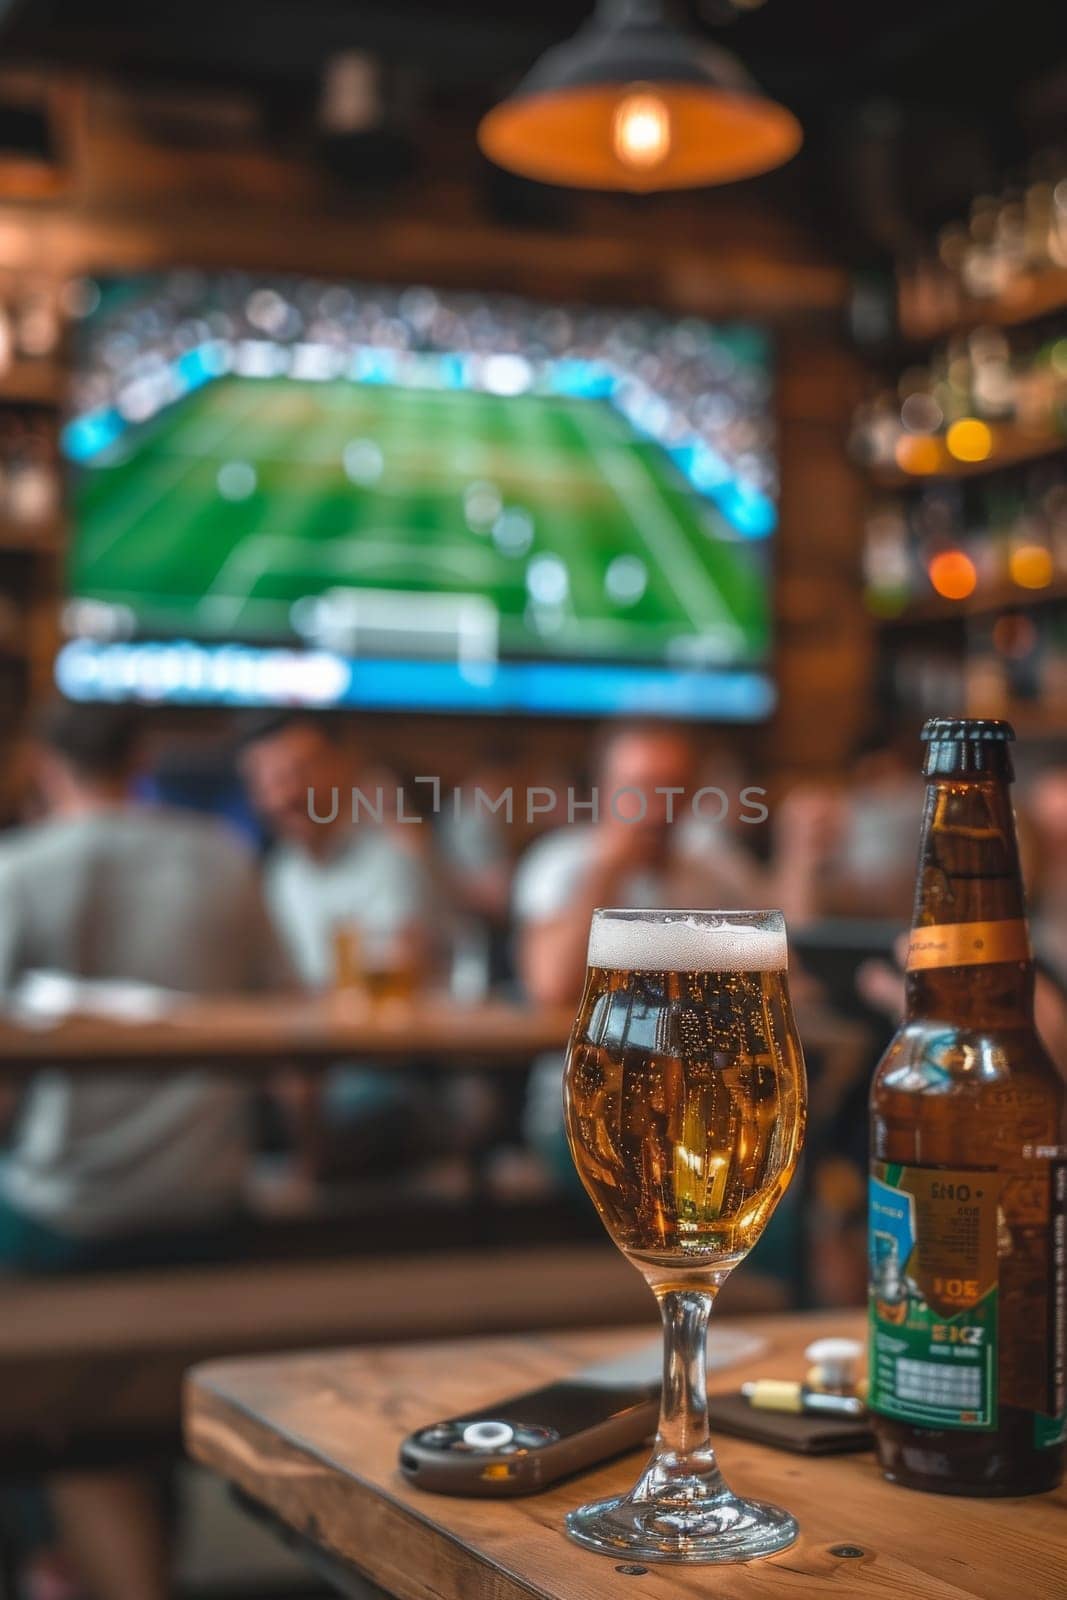 A glass of beer sits on a table next to a bottle of beer. The scene is set in a bar or pub, with a TV in the background showing a soccer game. The atmosphere is lively and social